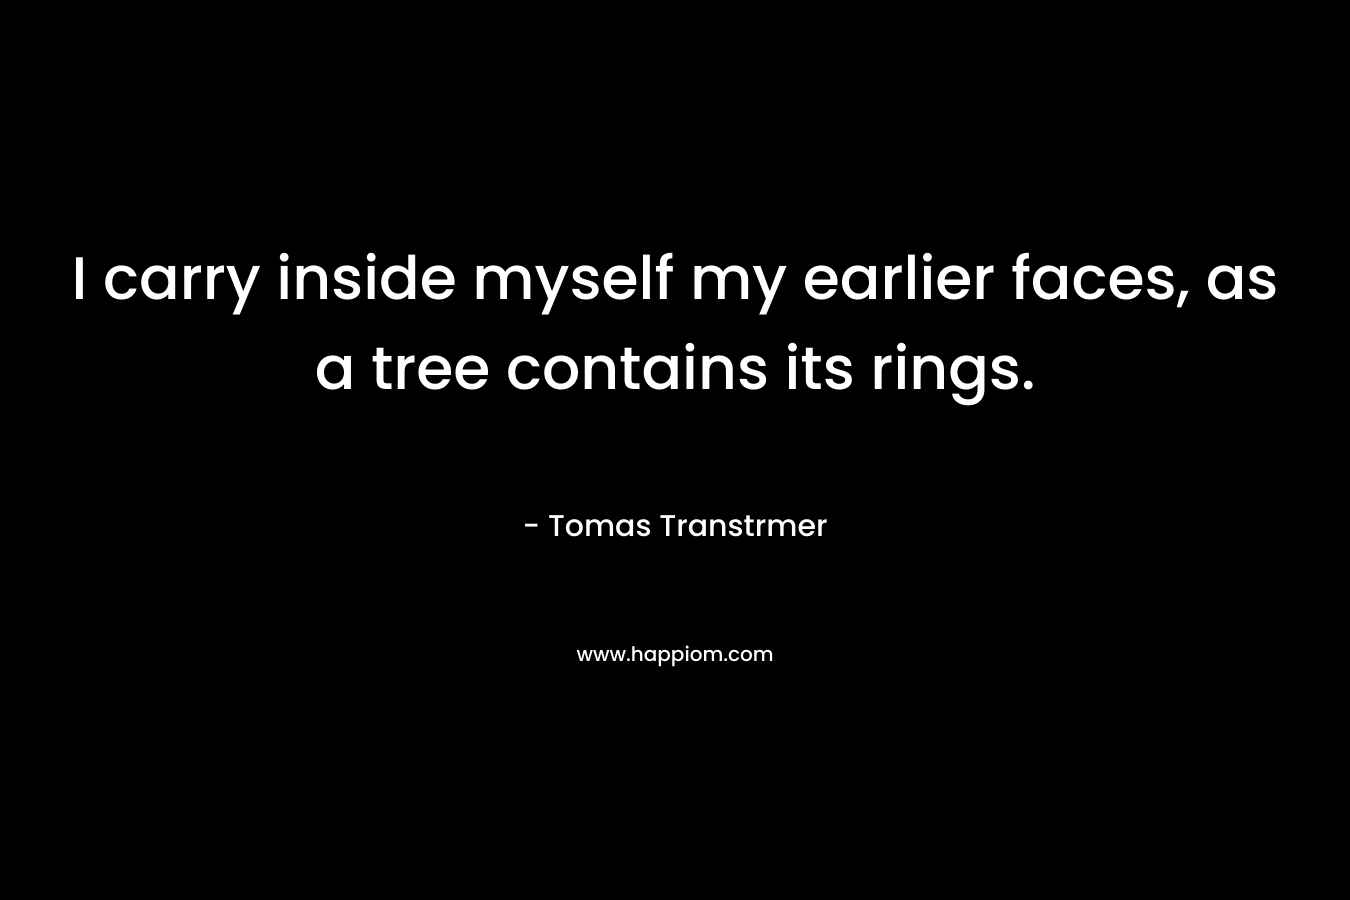 I carry inside myself my earlier faces, as a tree contains its rings. – Tomas Transtrmer